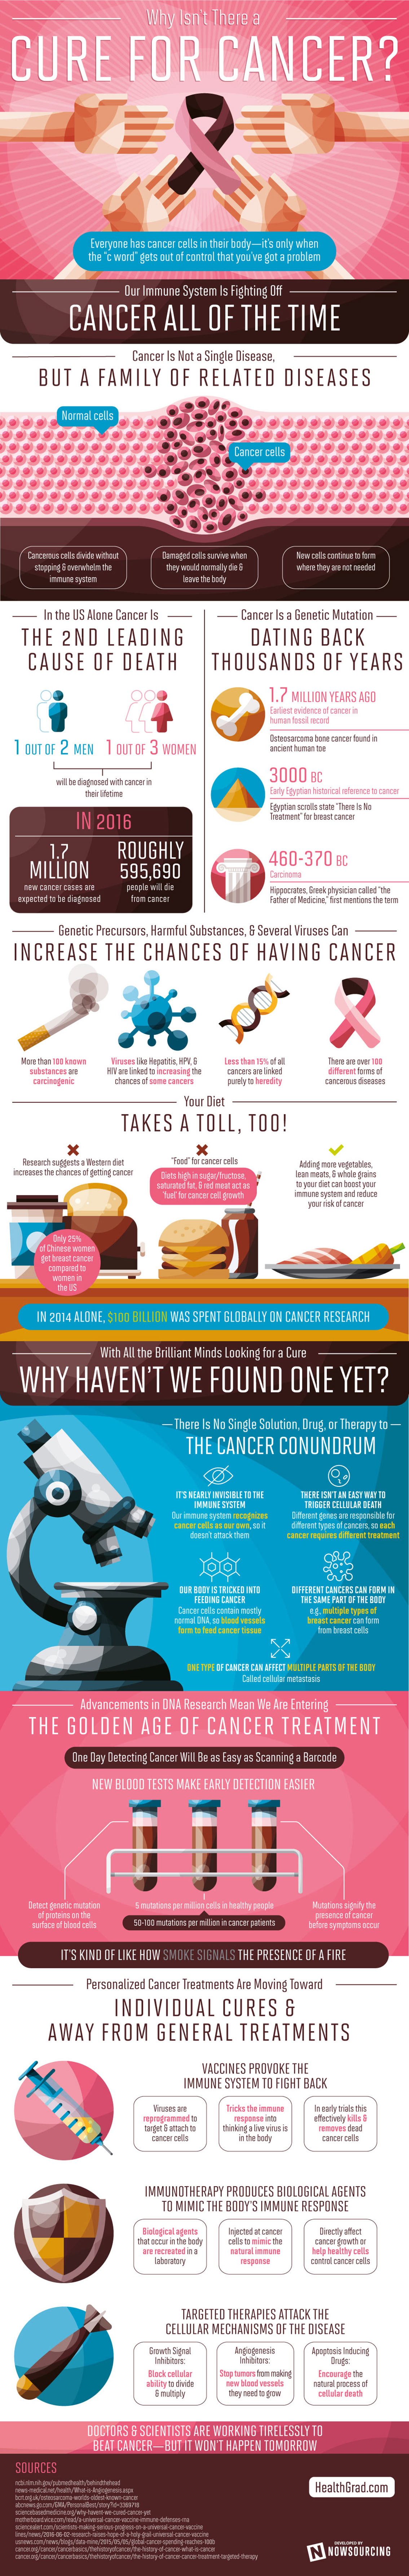 Why Haven’t We Found a Cure for Cancer Yet Infographic